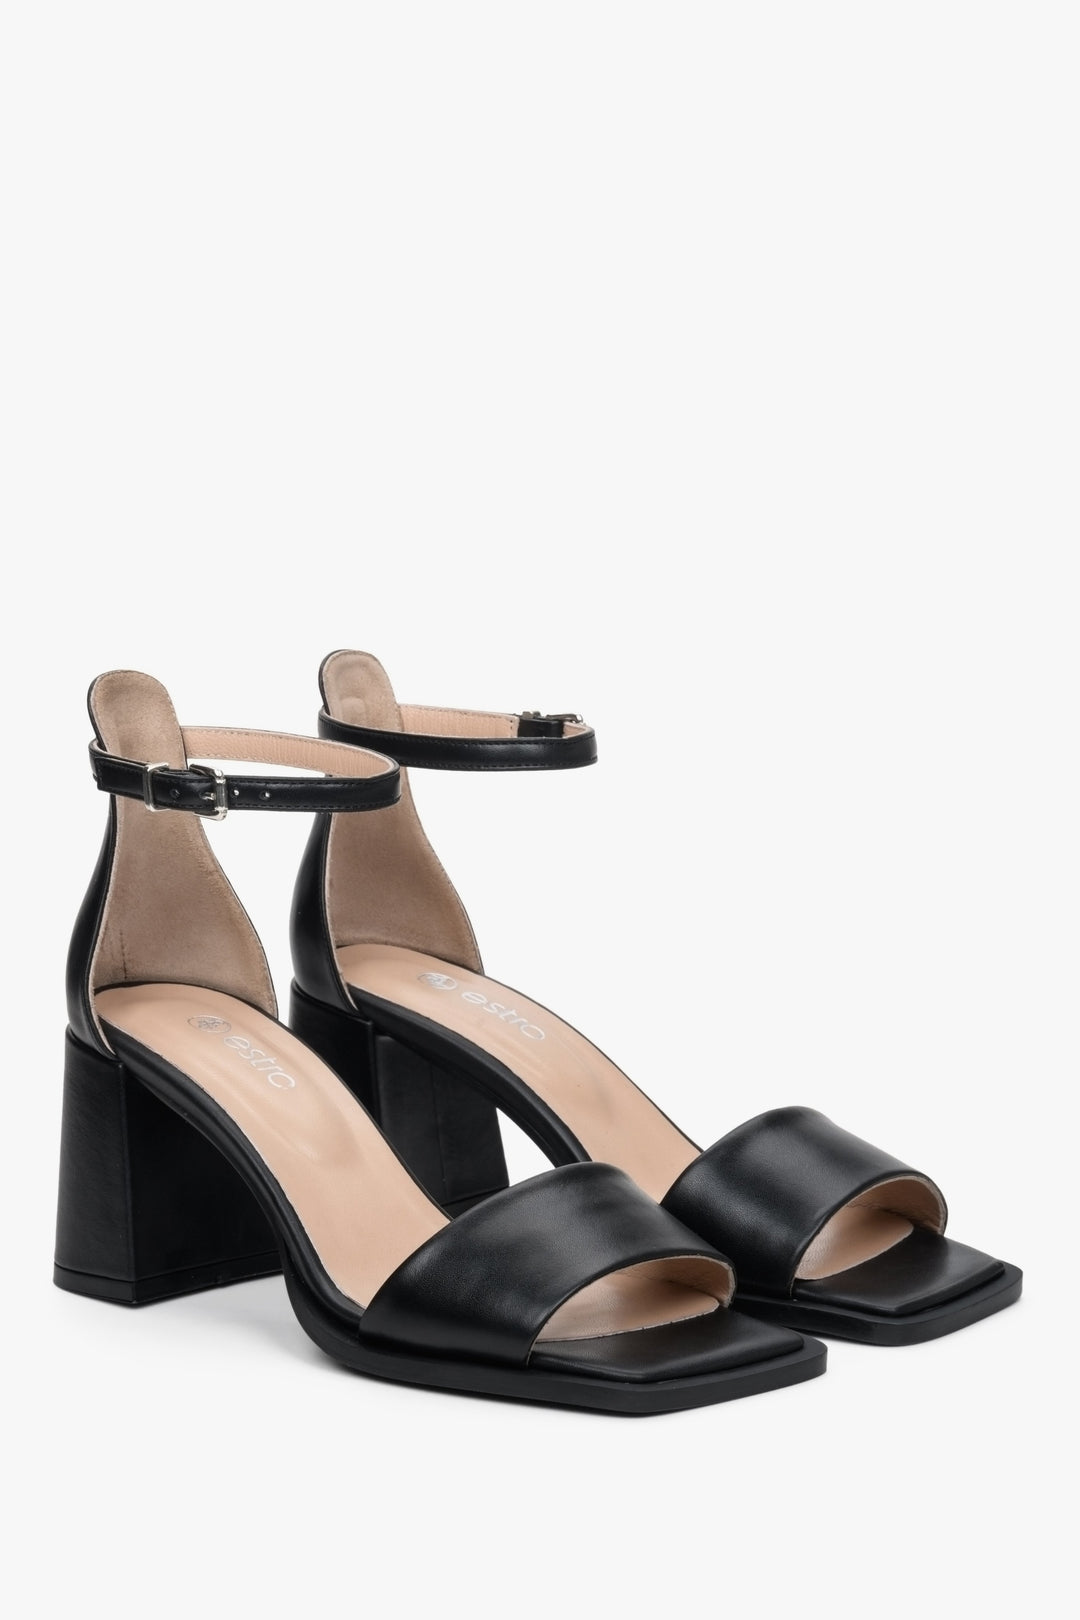 Estro block-heeled black sandals - presentation of the toe and side line of the summer footwear.